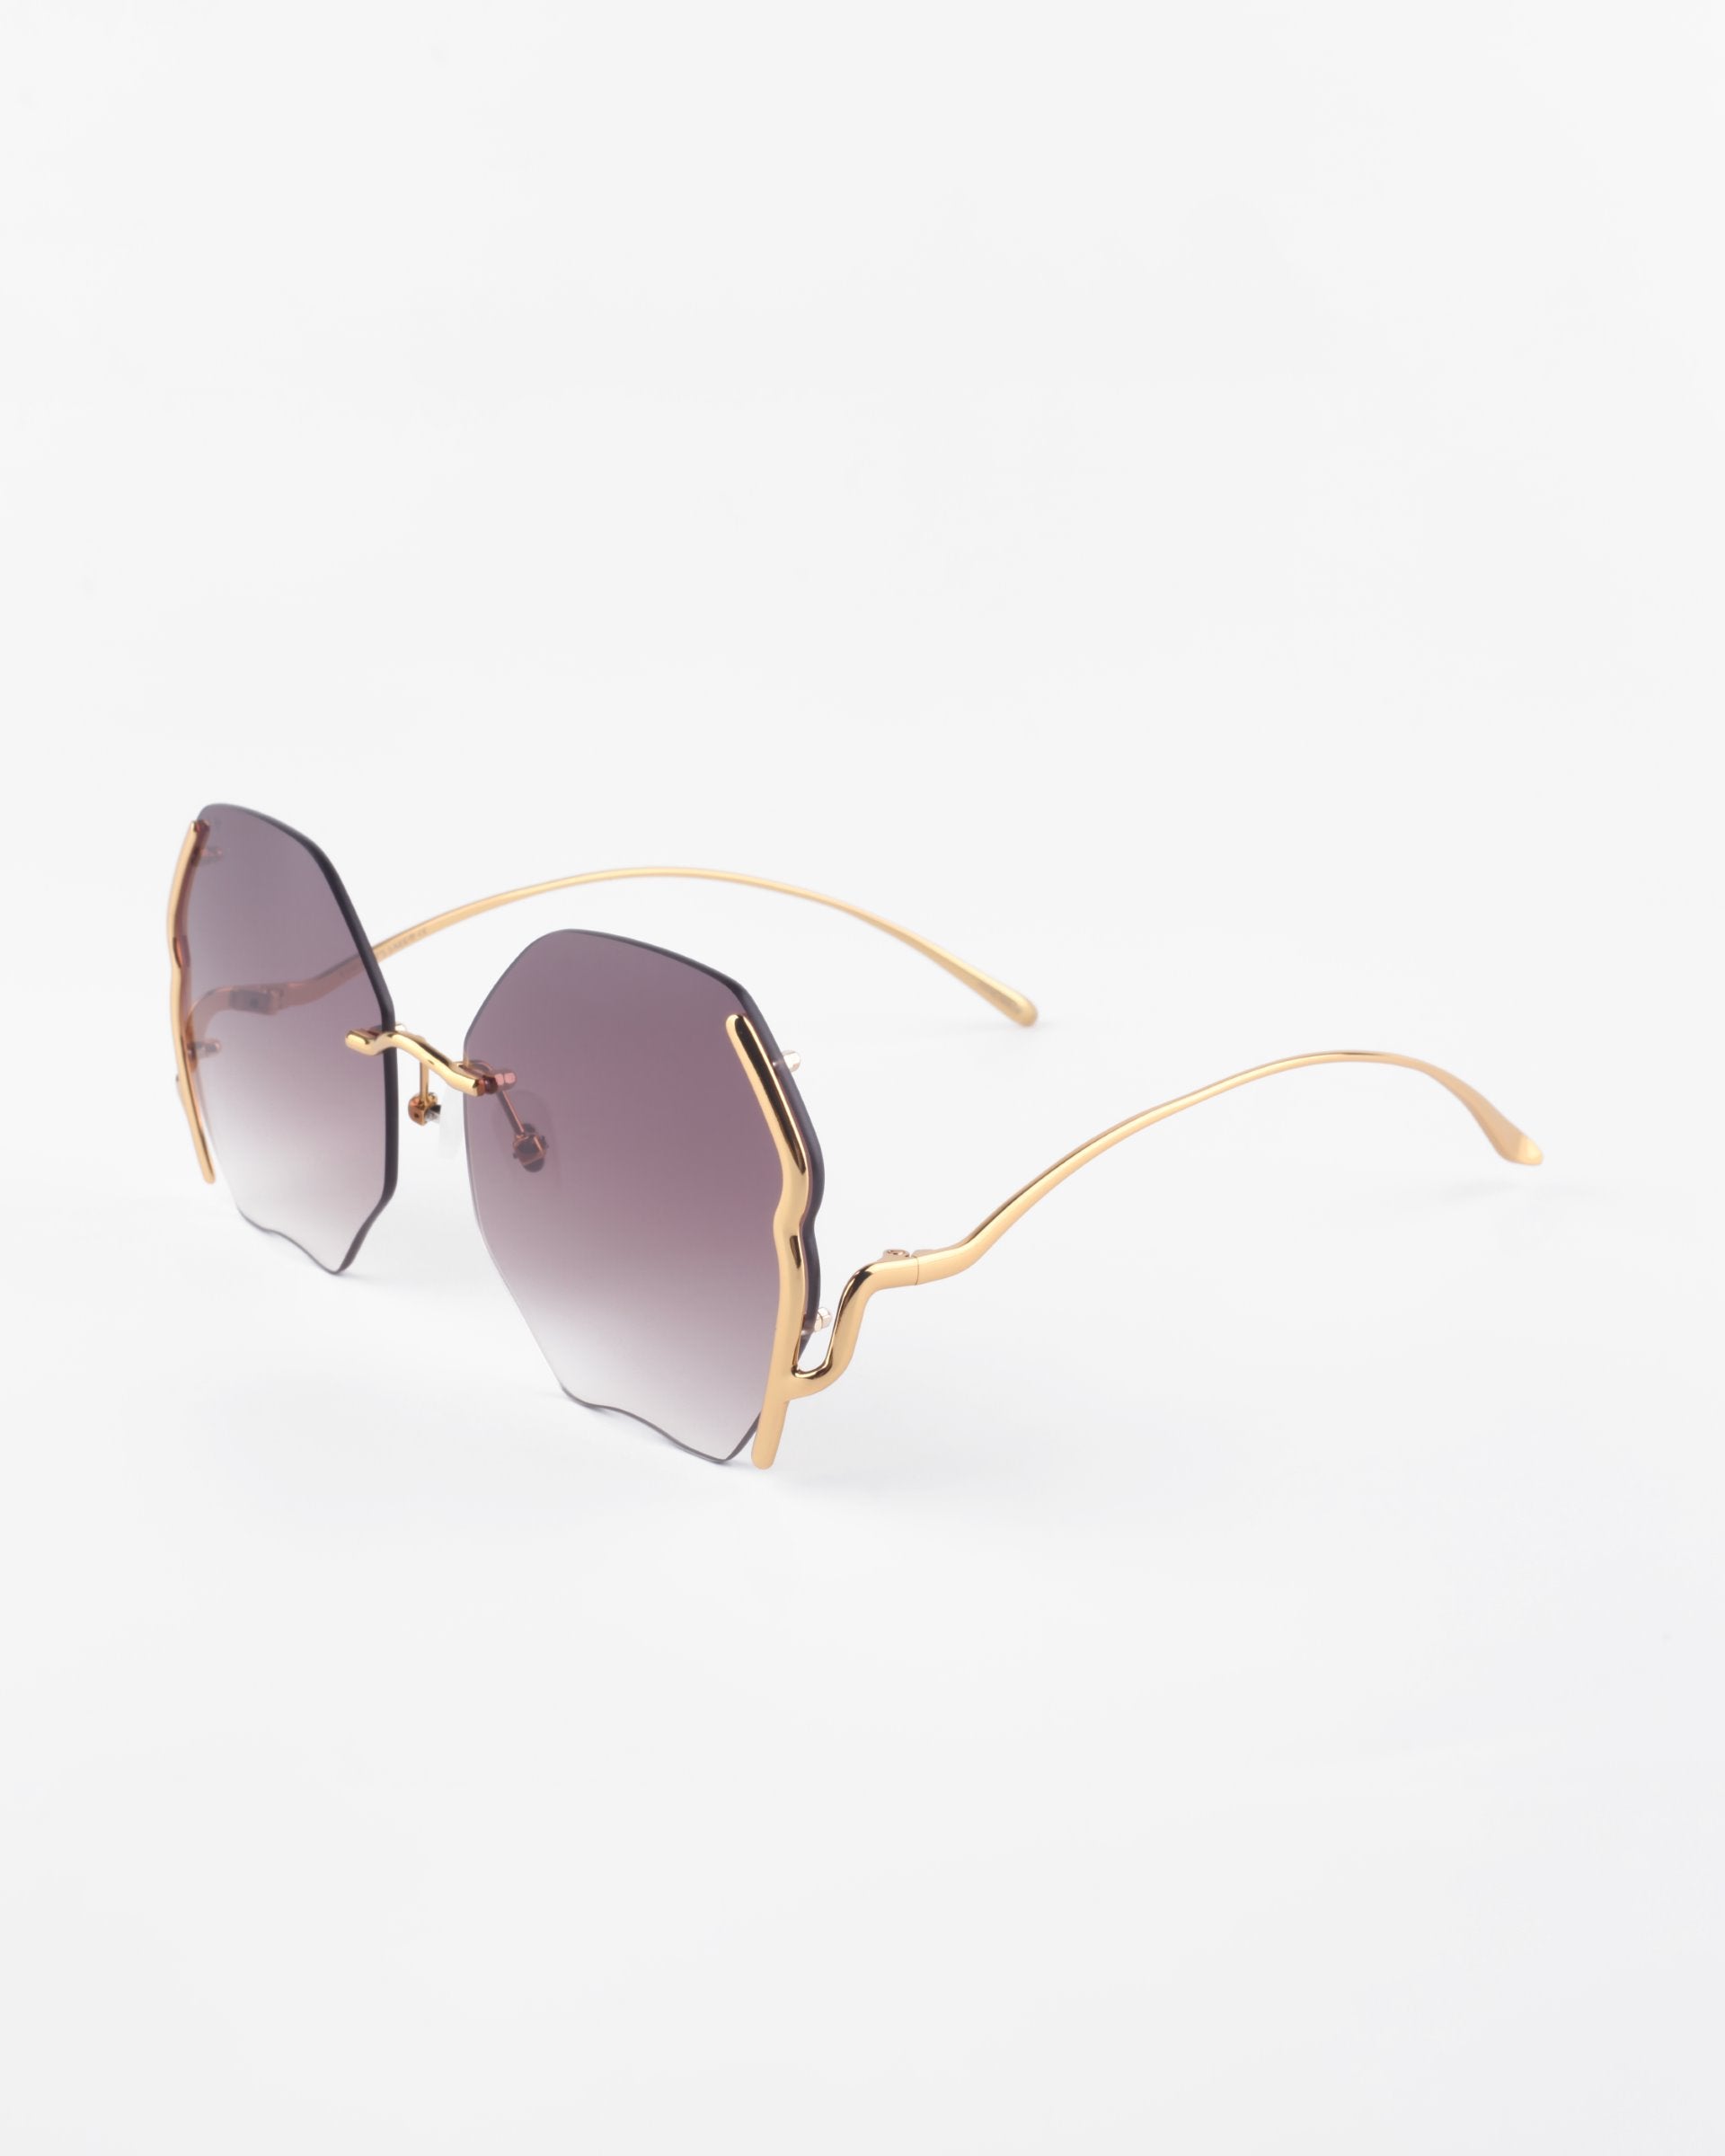 A pair of Century sunglasses from For Art&#39;s Sake® with irregularly shaped, lightly tinted lenses and thin, gold-plated stainless steel frames. The lenses have a gradient from dark to light tint, offering 100% UVA &amp; UVB protection. The overall design is modern and stylish.